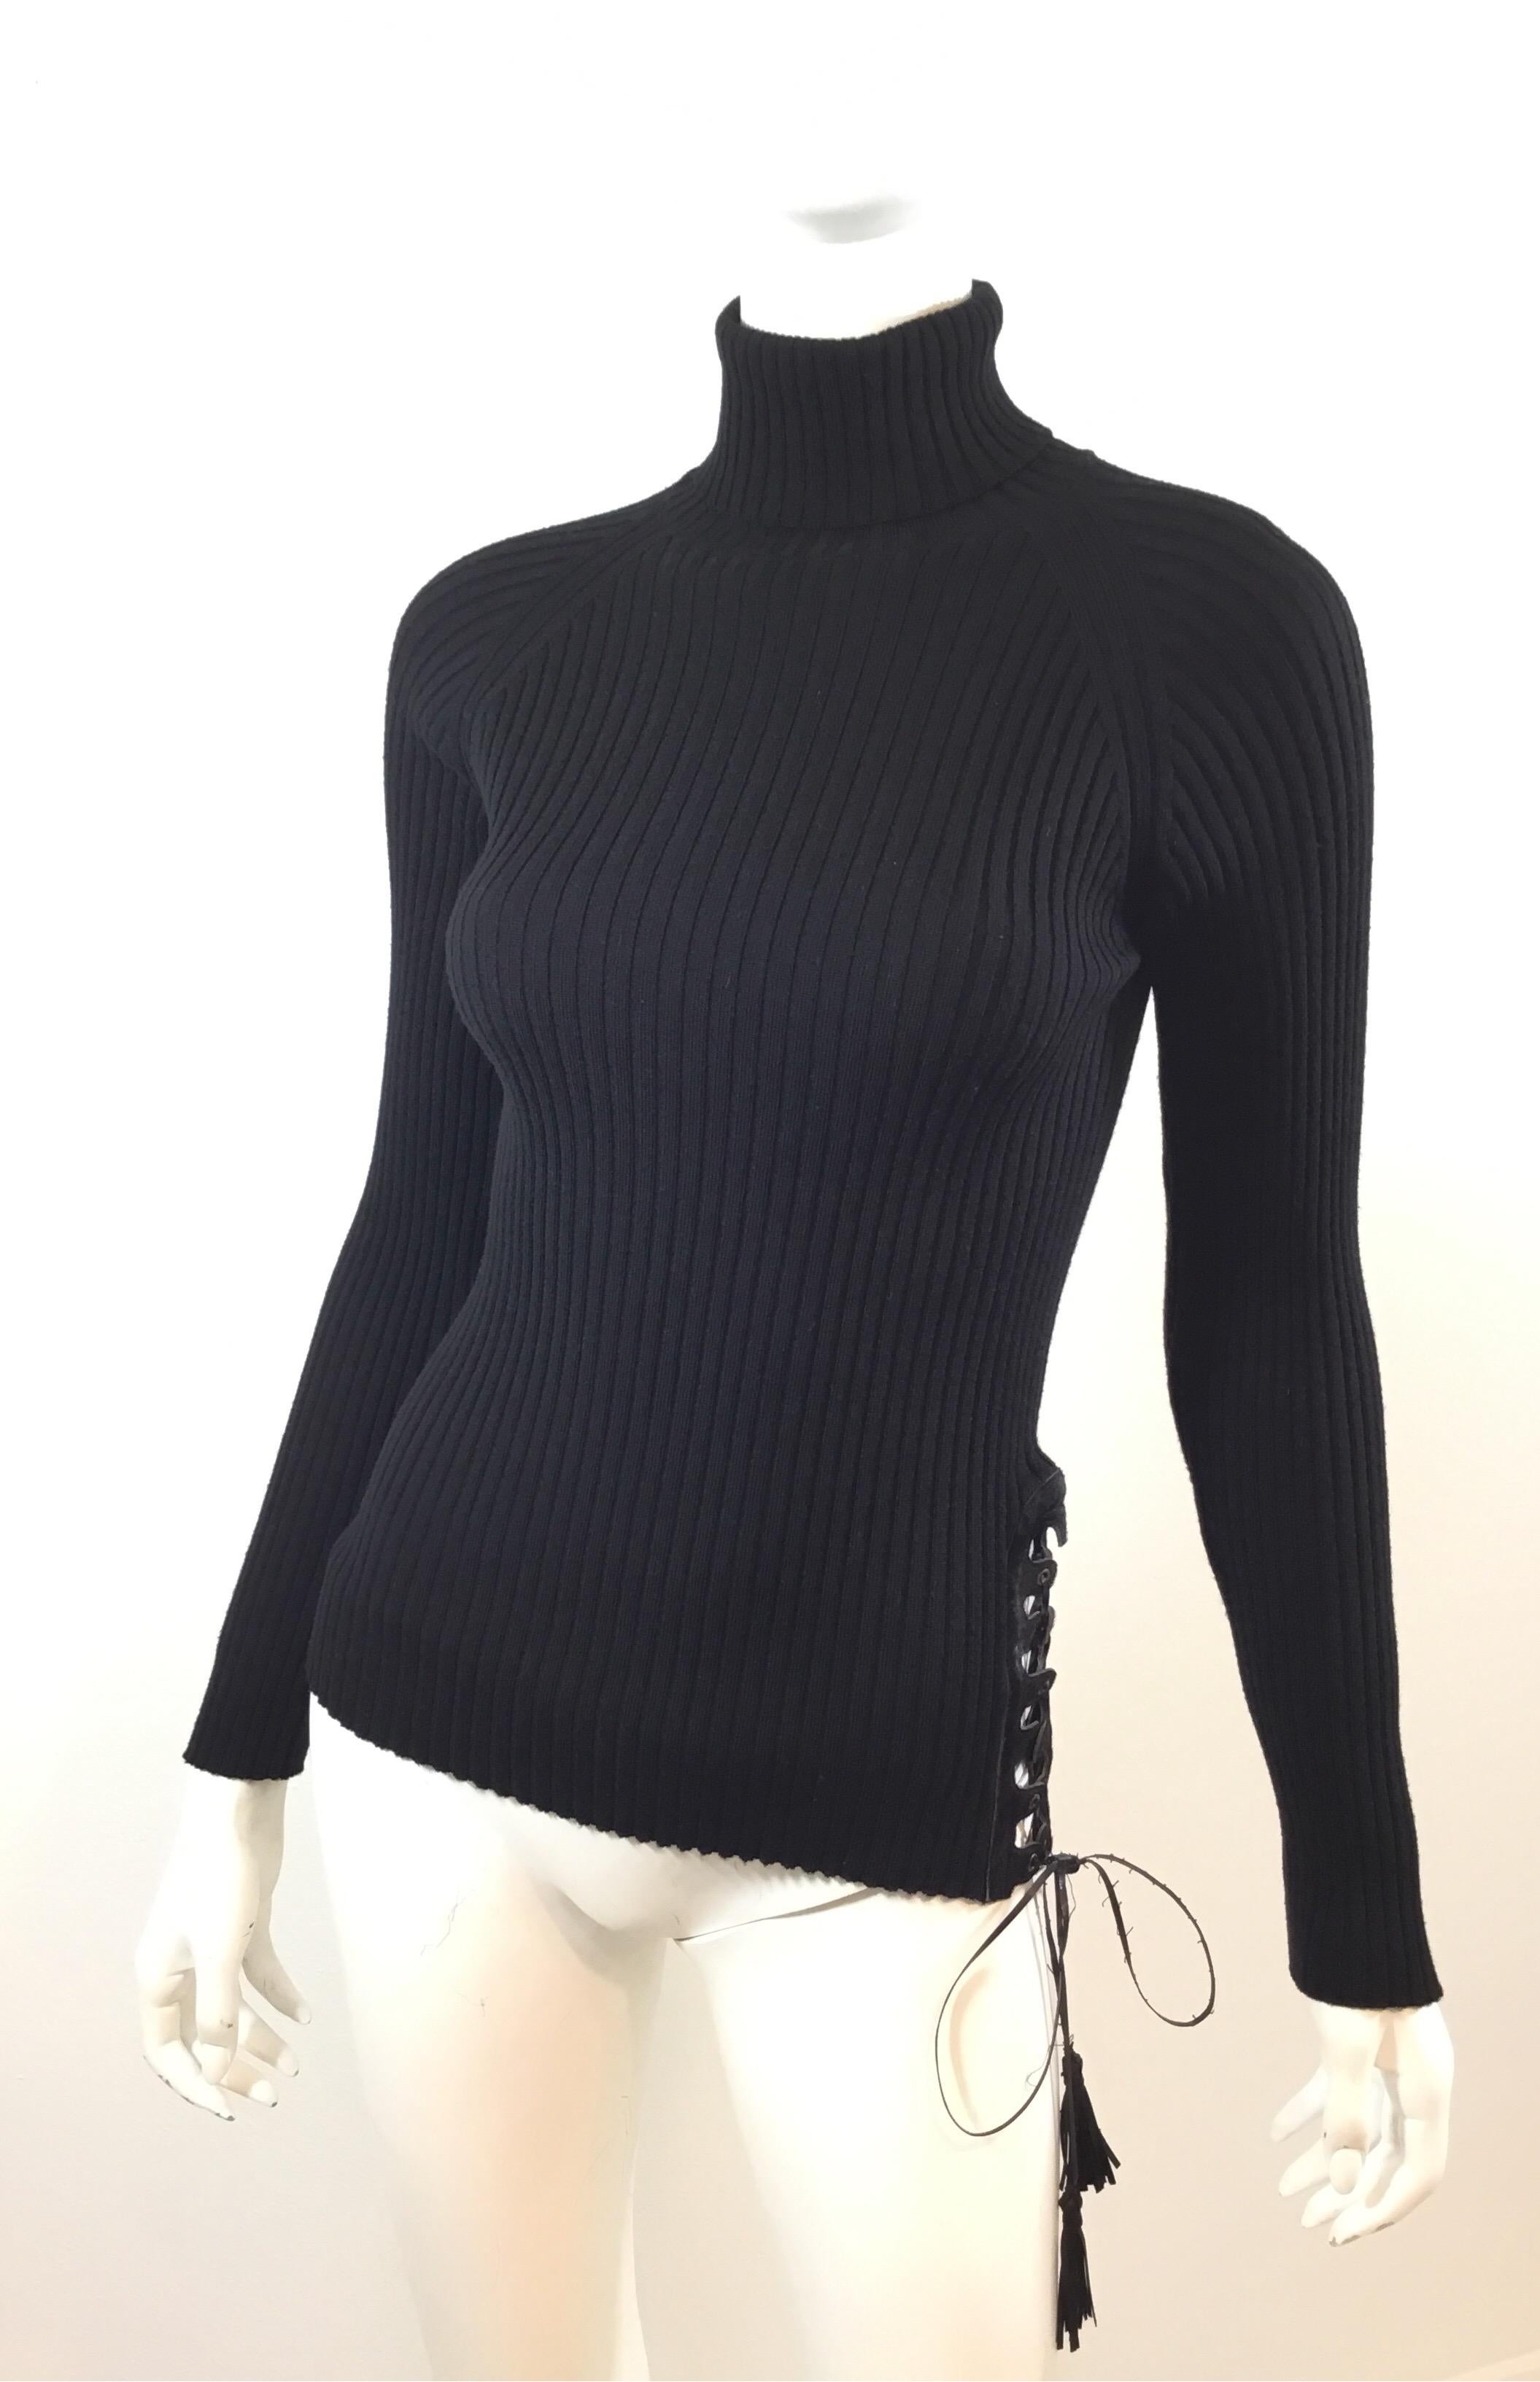 Jean Paul Gaultier Ribbed knit turtleneck features a pony fur and lace up detail along the left side hem with a leather and tassel string tie. Top is a size Medium and composed of 100% wool. Normal wears the leather string tie.

Bust 26” (some